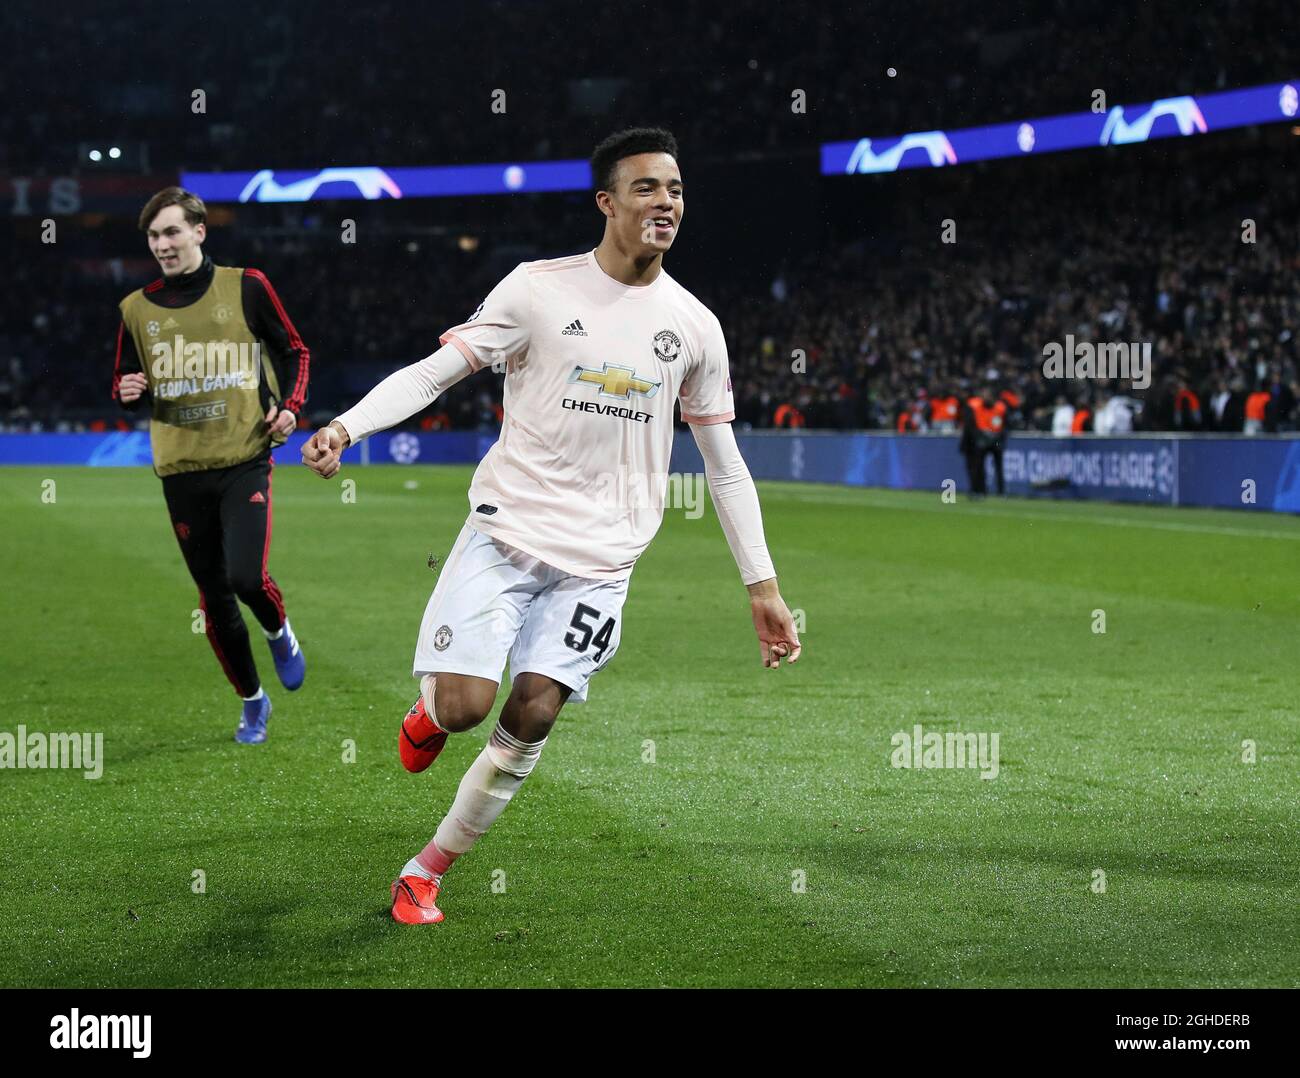 Manchester United's Mason Greenwood celebrates at the final whistle during the UEFA Champions League Round of Sixteen match at the Parc des Princes Stadium, Paris. Picture date: 6th March 2019. Picture credit should read: David Klein/Sportimage via PA Images Stock Photo